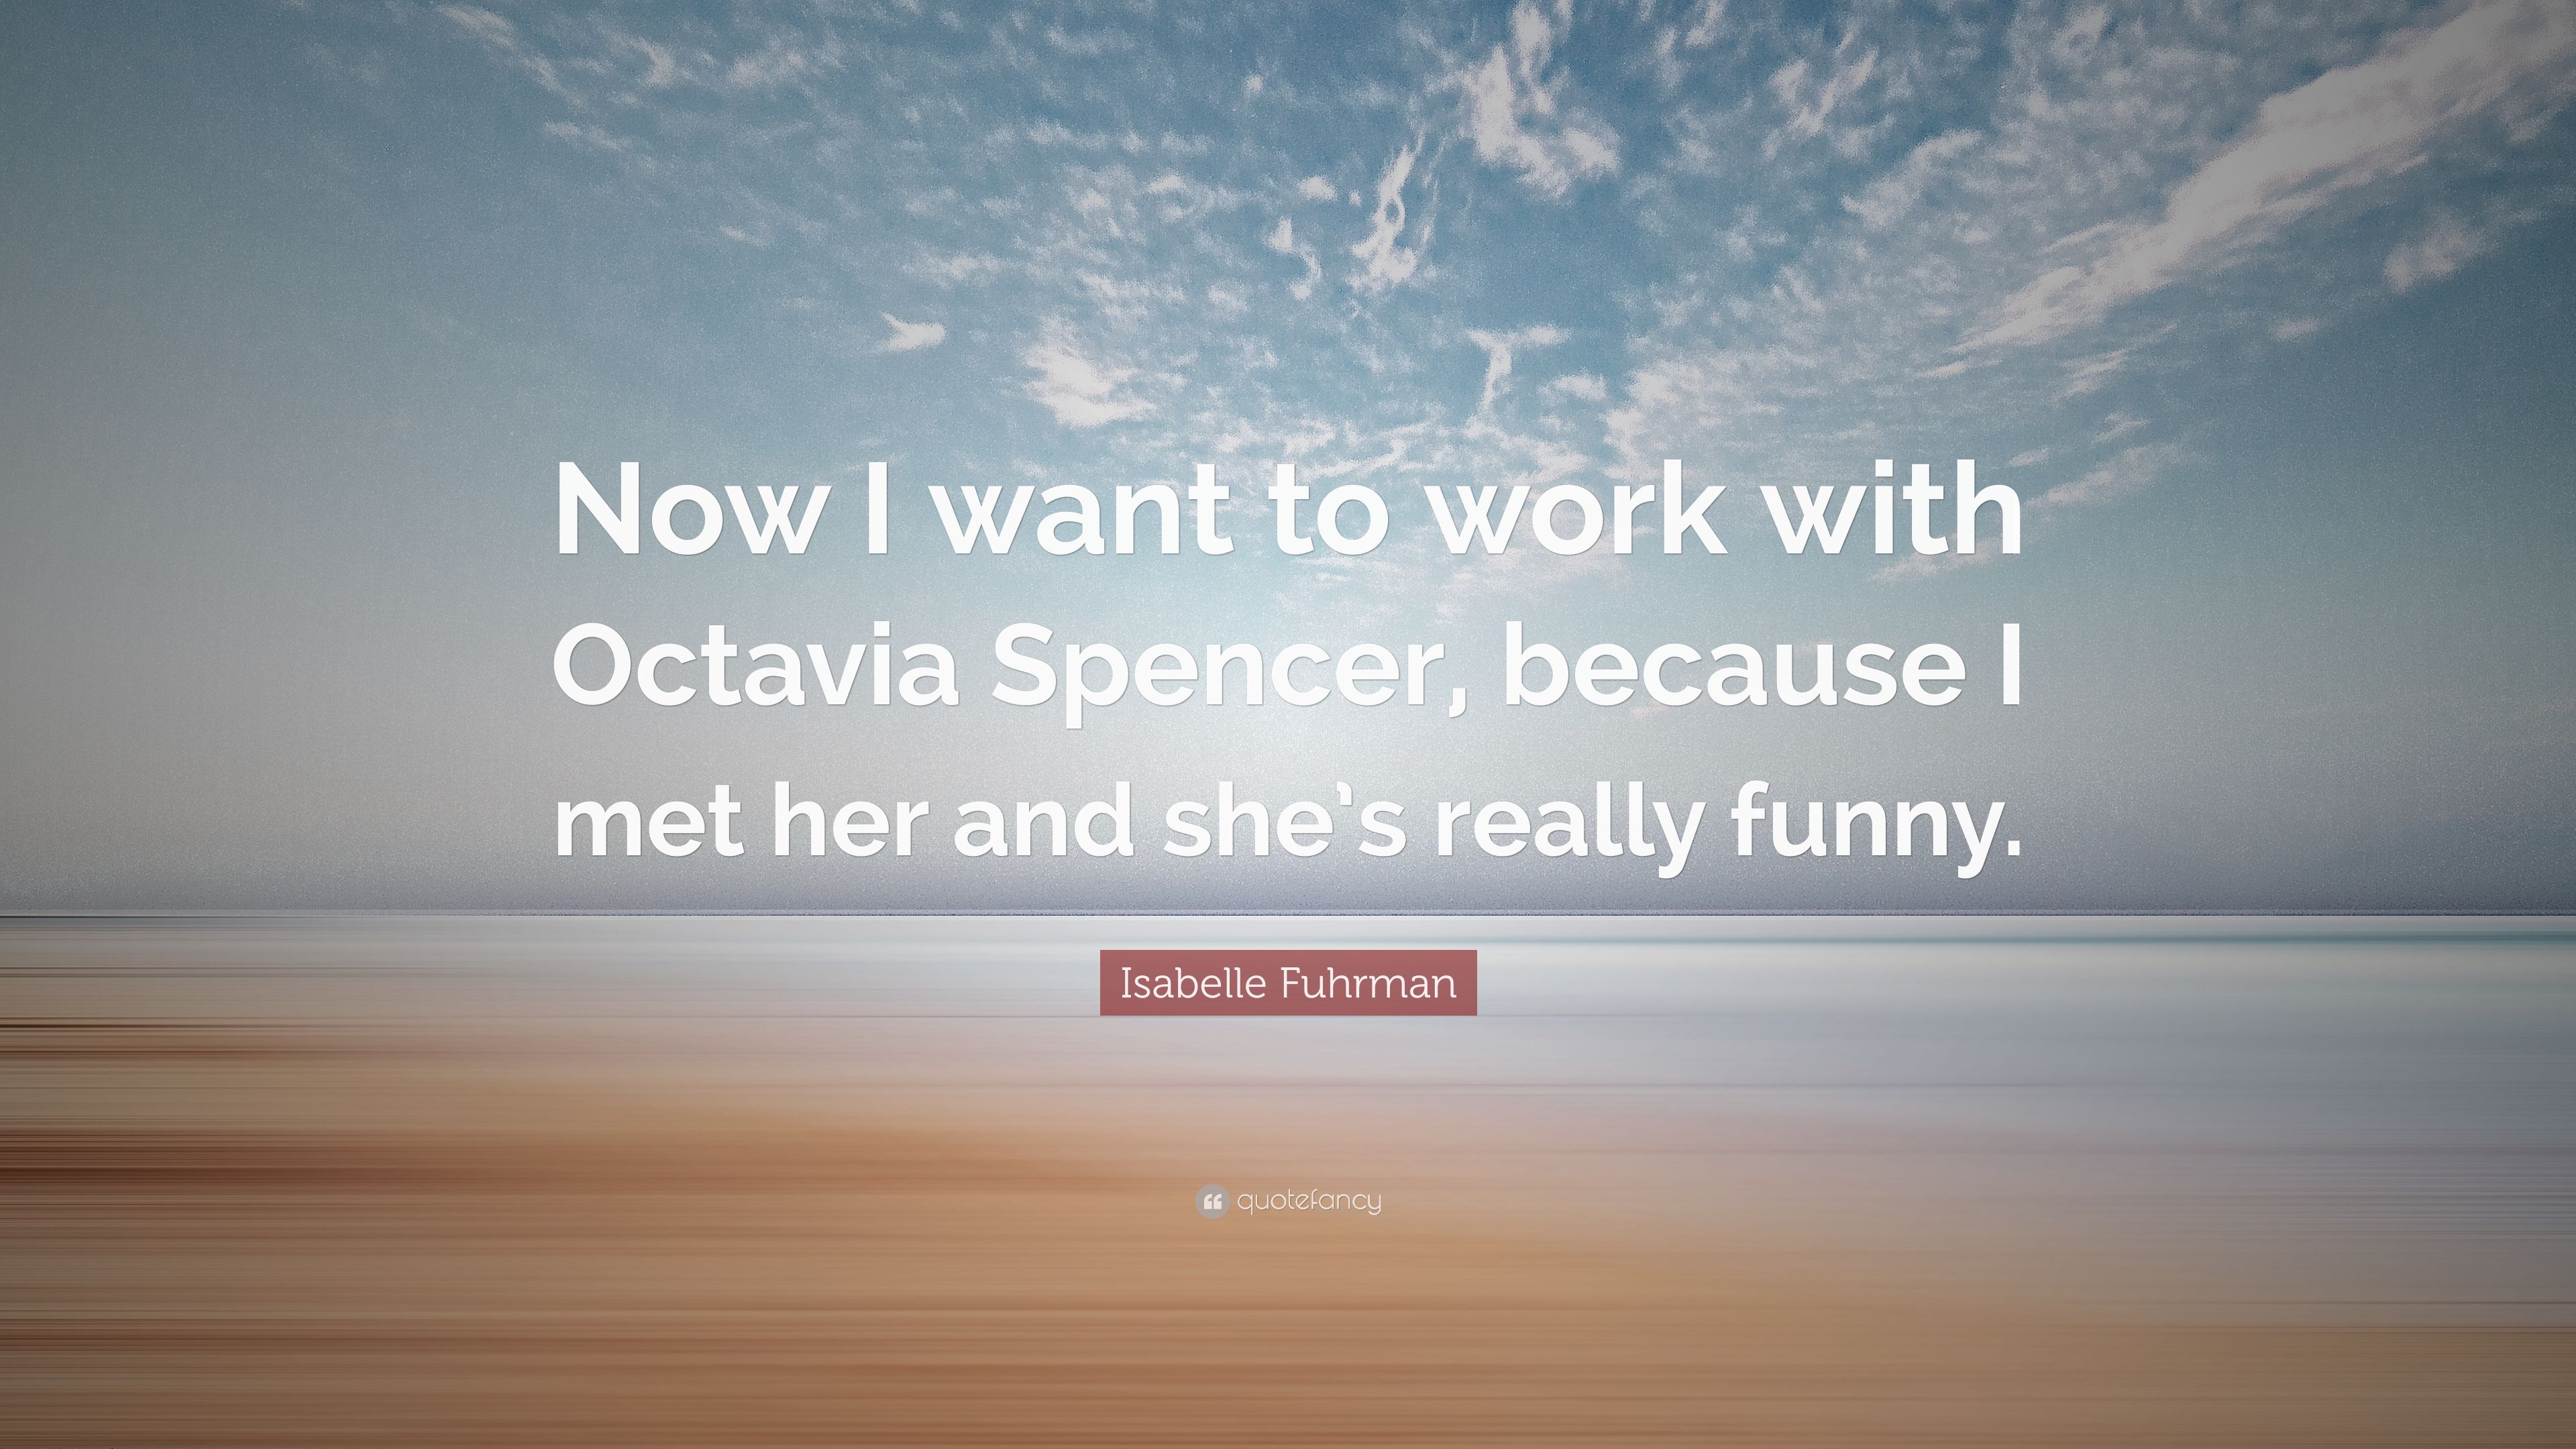 Isabelle Fuhrman Quote: “Now I want to work with Octavia Spencer